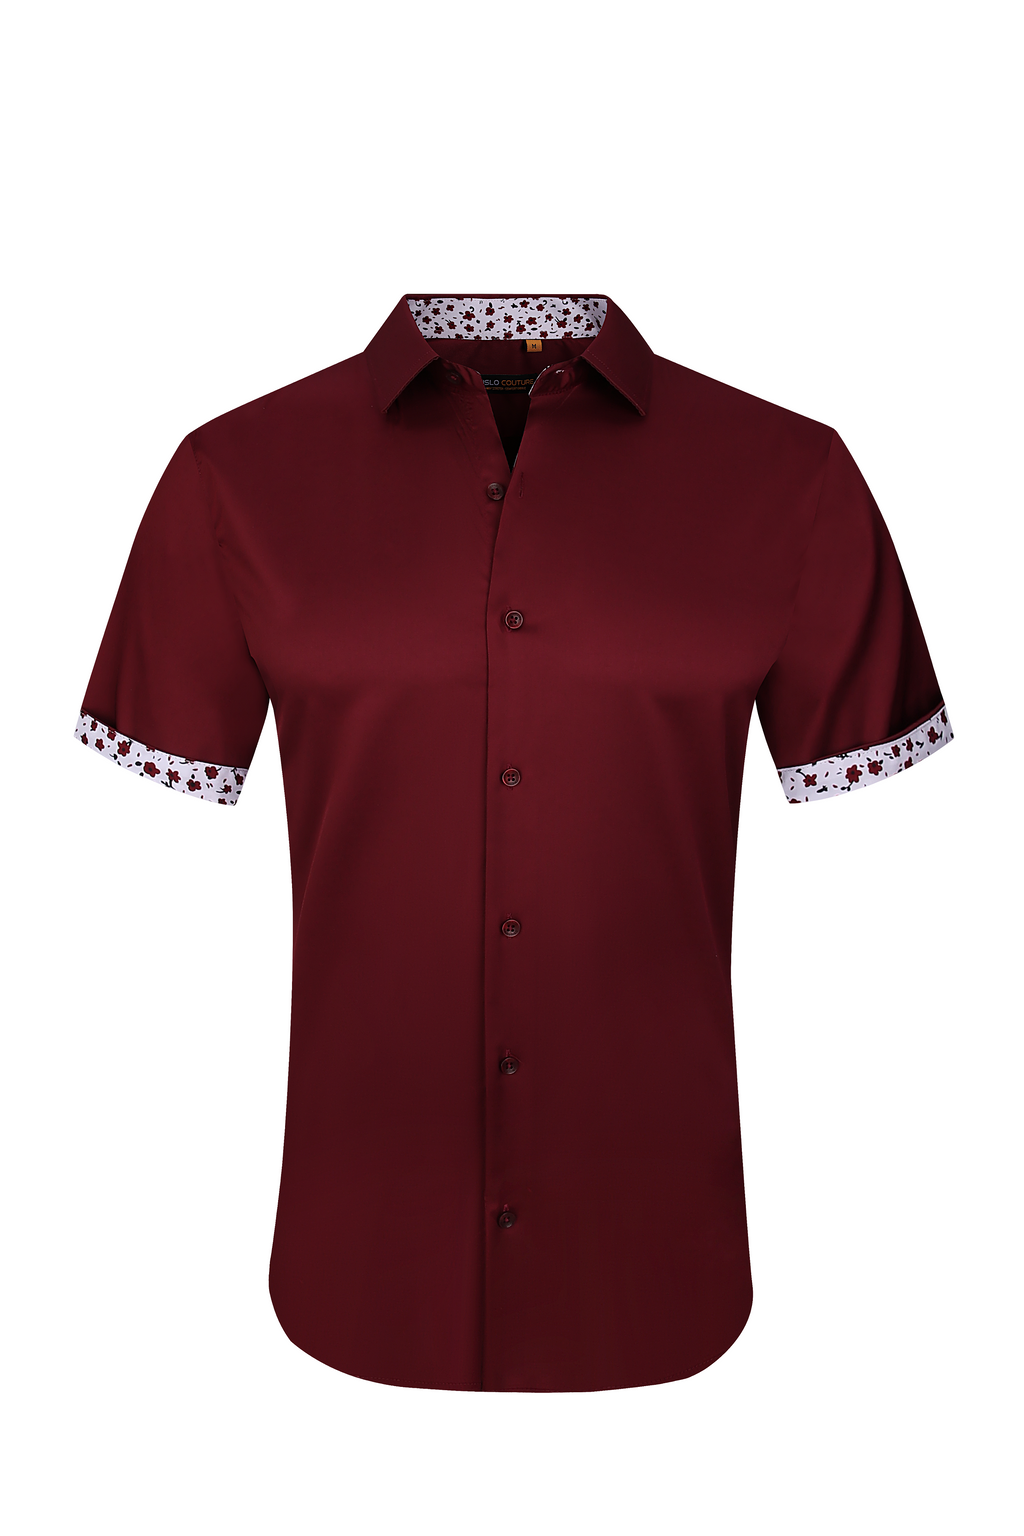 Short Sleeve Suslo – Stretch Suslo Shirt Burgundy - 4 Way Couture Solid